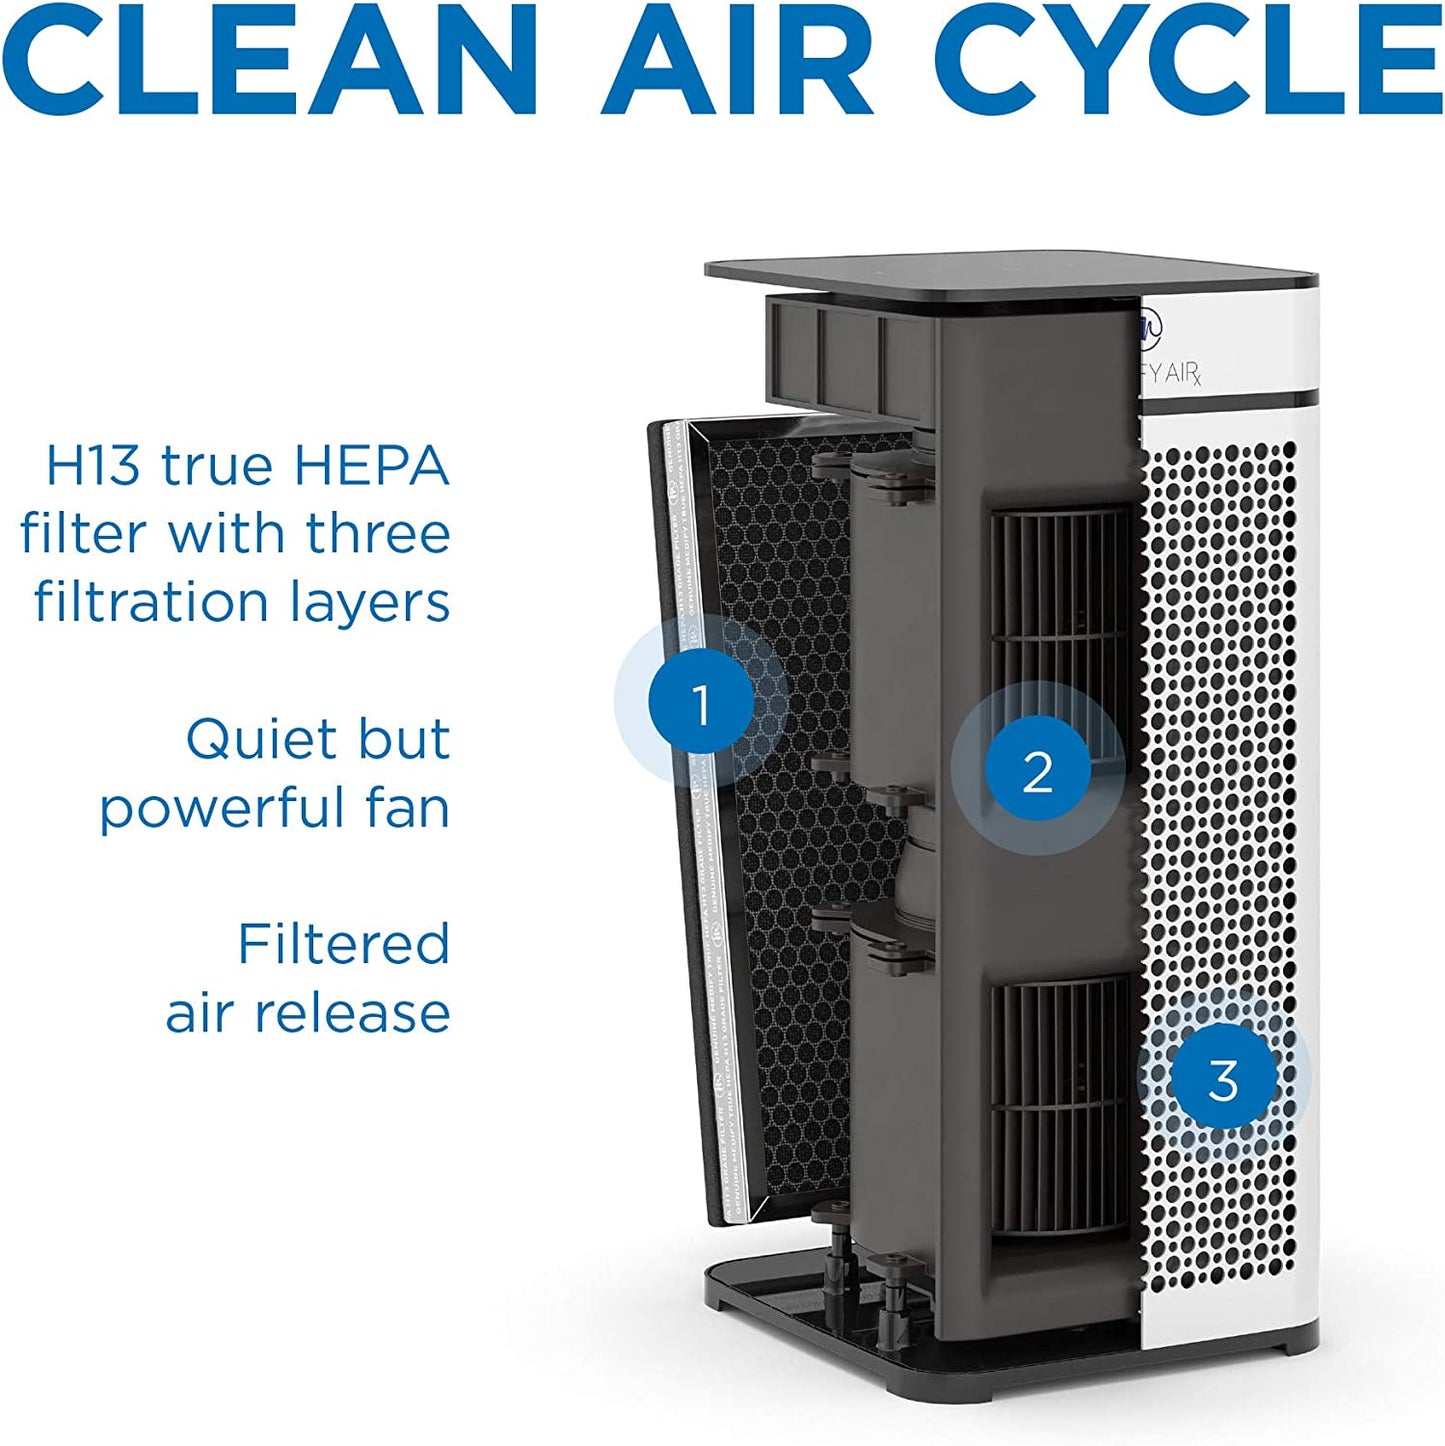 Medify MA-40 Air Purifier with H13 True HEPA Filter | 840 sq ft Coverage | for Allergens, Smoke, Smokers, Dust, Odors, Pollen, Pet Dander | Quiet 99.9% Removal to 0.1 Microns | White